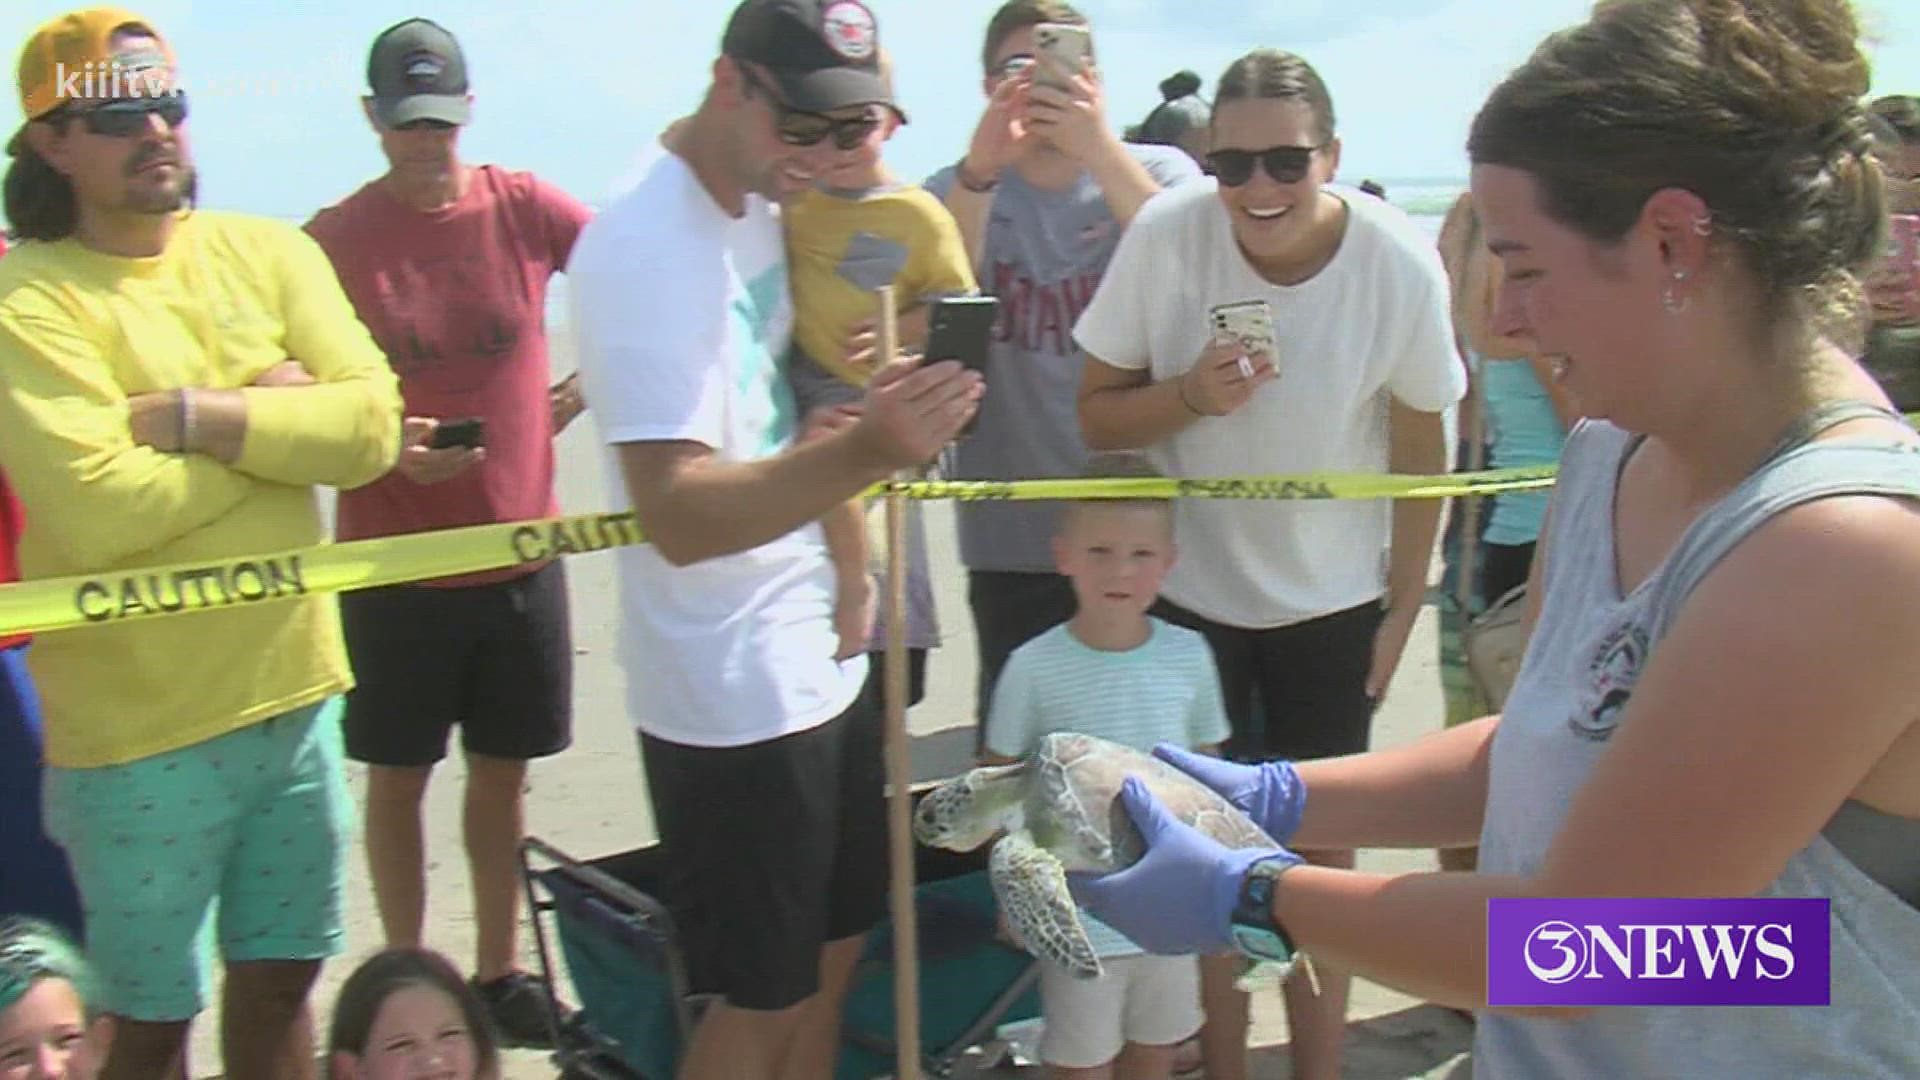 All four of the turtles received treatment at the center and were ready to go back home.